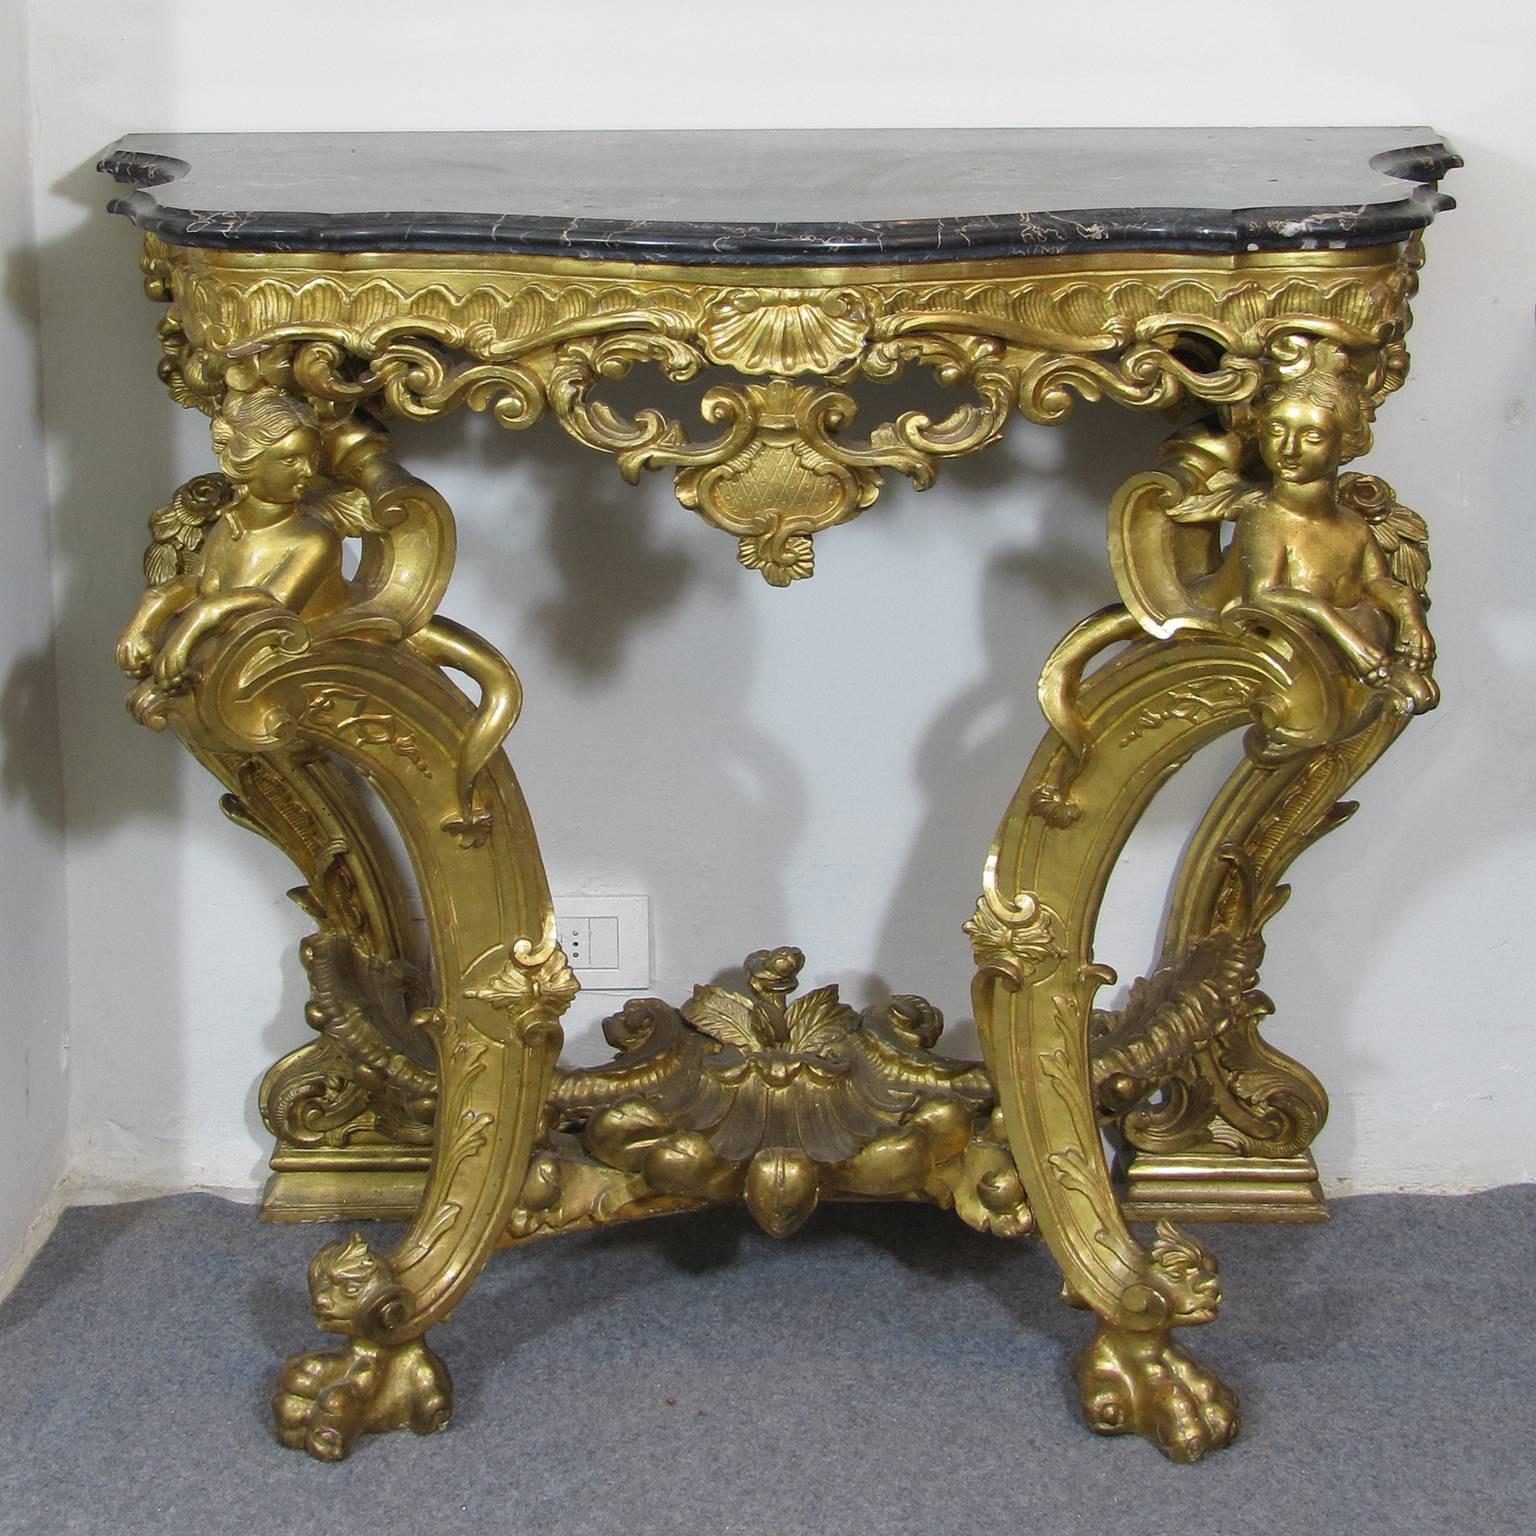 A particular Louis XV gilt and sculpted wood console or side table, freestanding on four cabriole legs each leg displays handsome paw feet.
The beautiful serpentine marble top is placed over the pierced frieze carved with C-scrolls and acanthus,